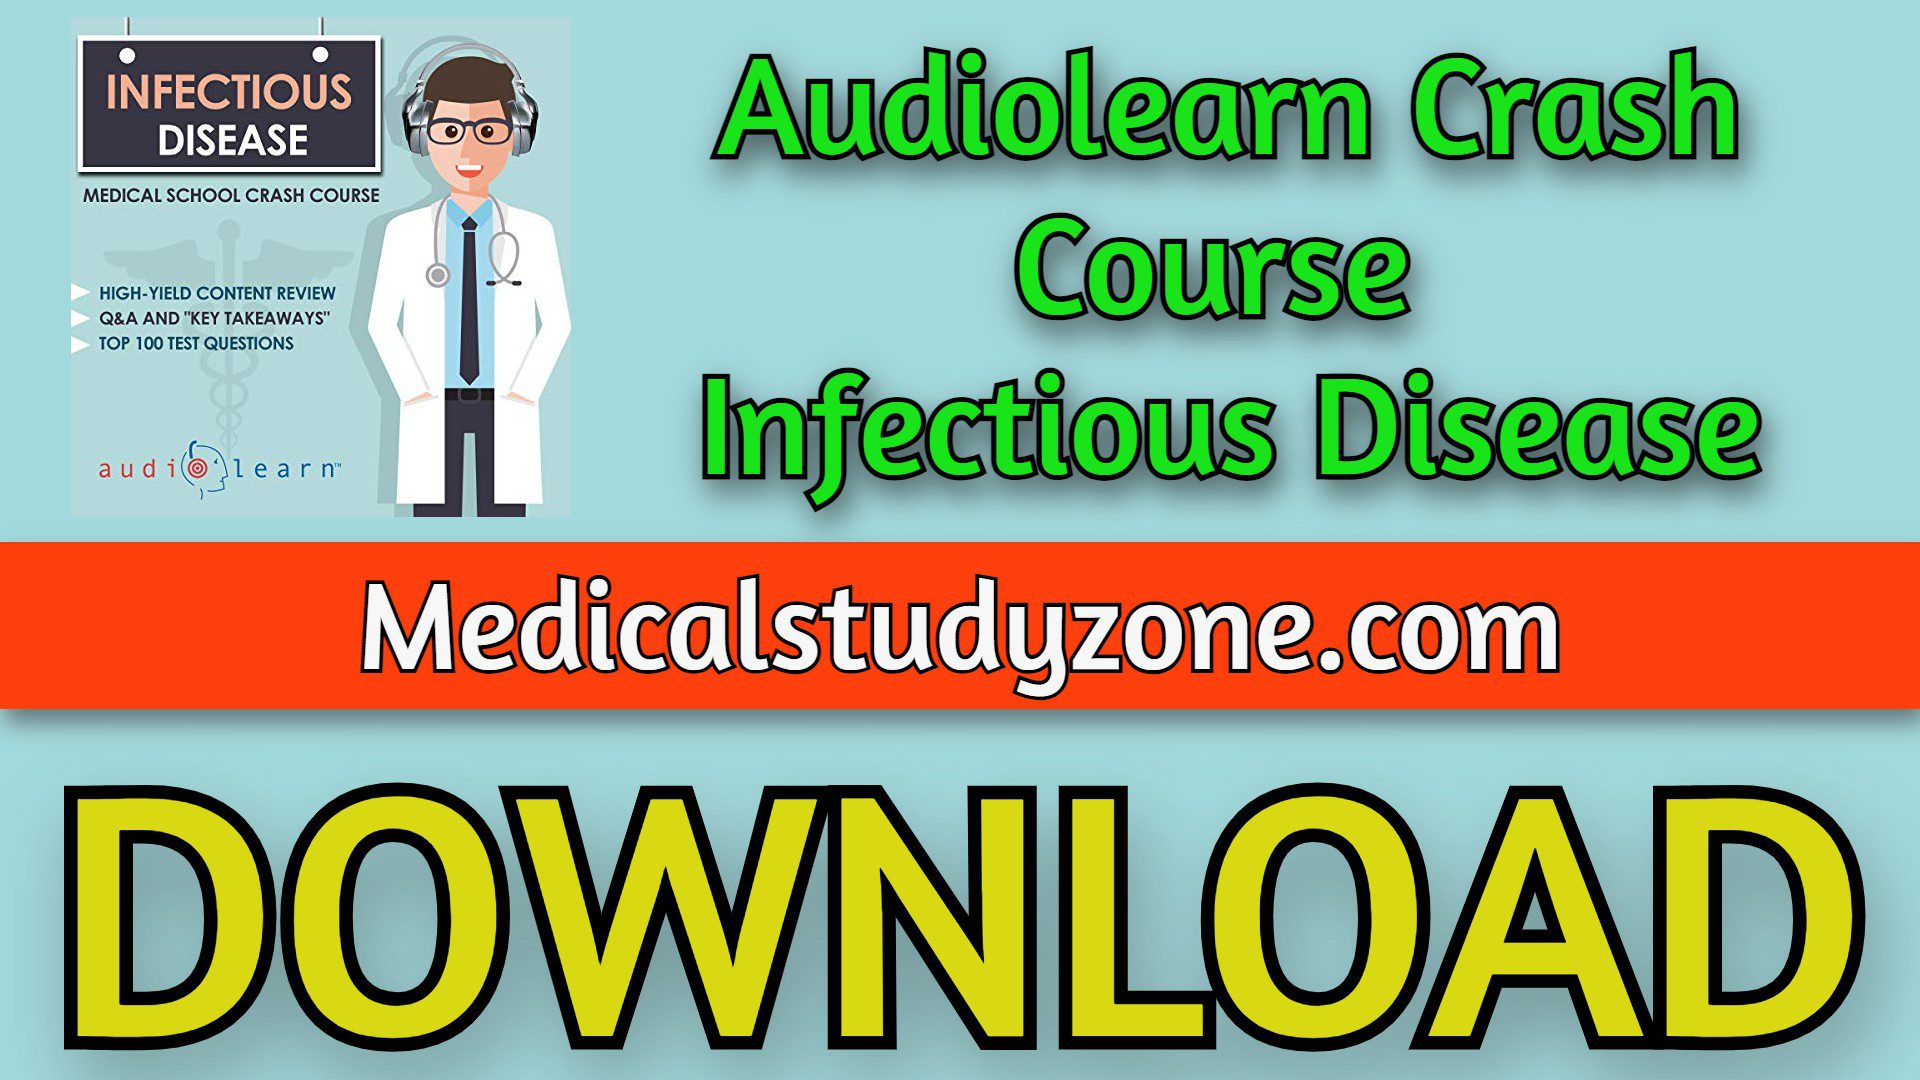 Audiolearn Crash Course Infectious Disease 2021 Free Download